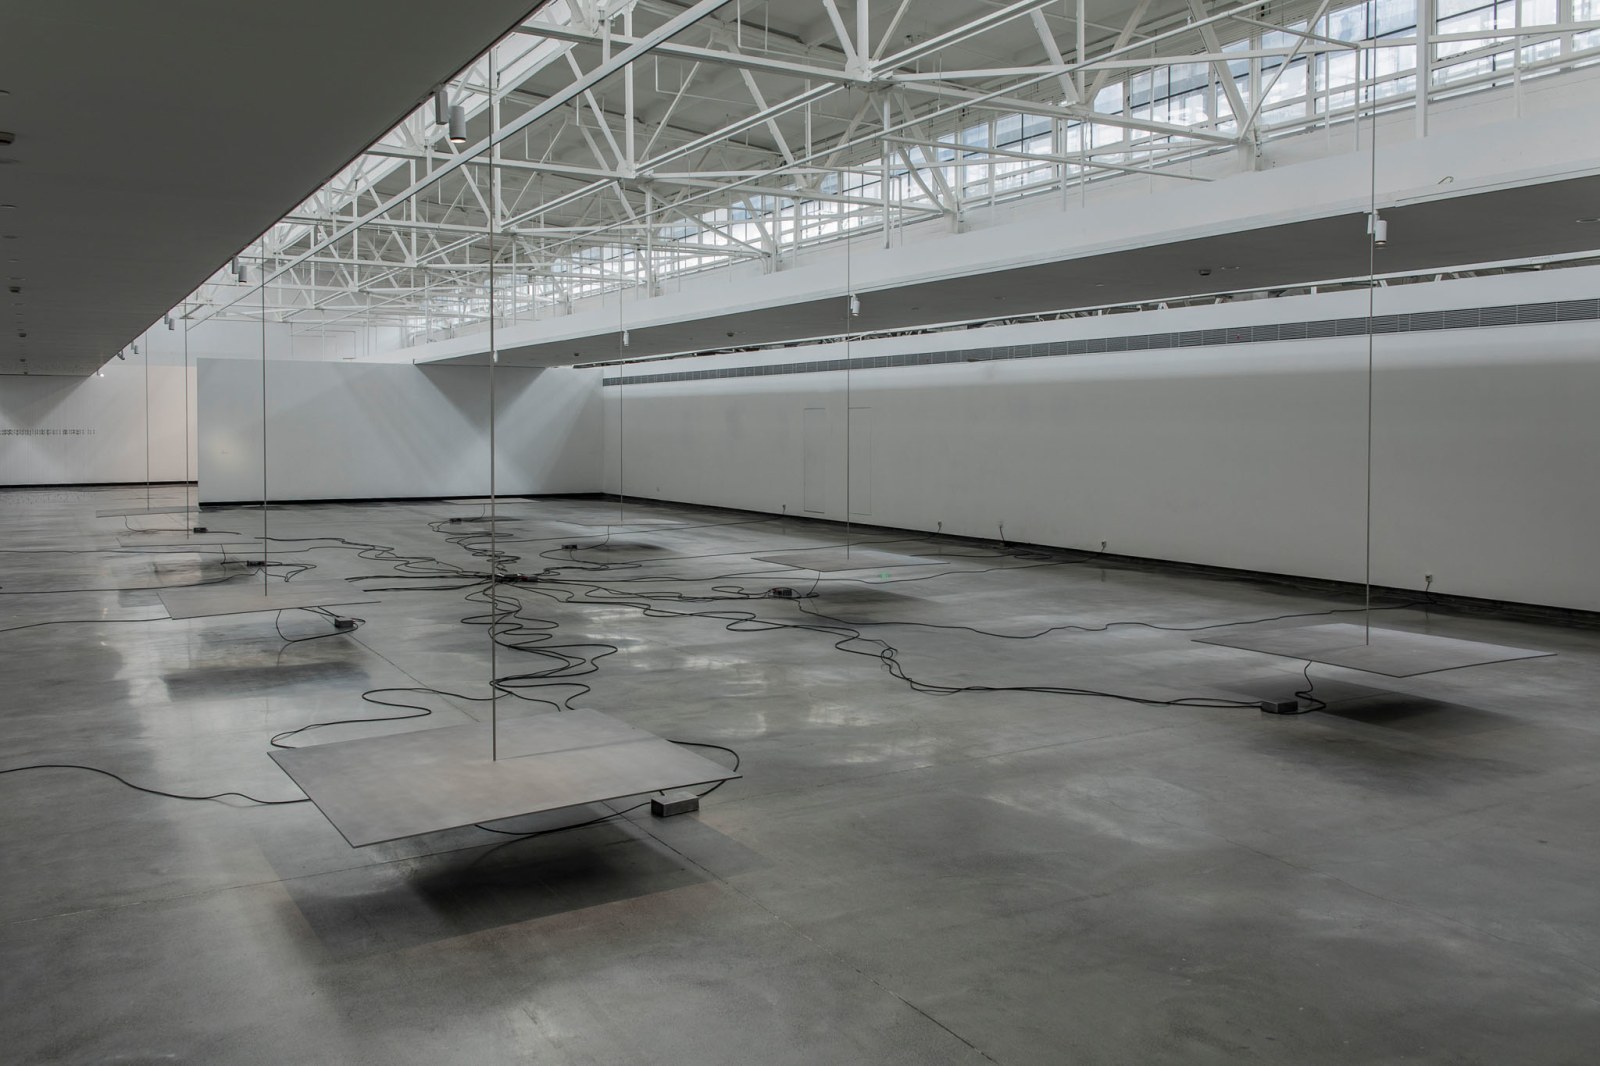 <div class="image_caption_container"><div class="image_caption"><p>Exhibition view: <strong>Flow With Matter</strong>, Minsheng Art Museum, Shanghai, 2020. Photo © Shanghai Minsheng Art Museum</p></div></div>